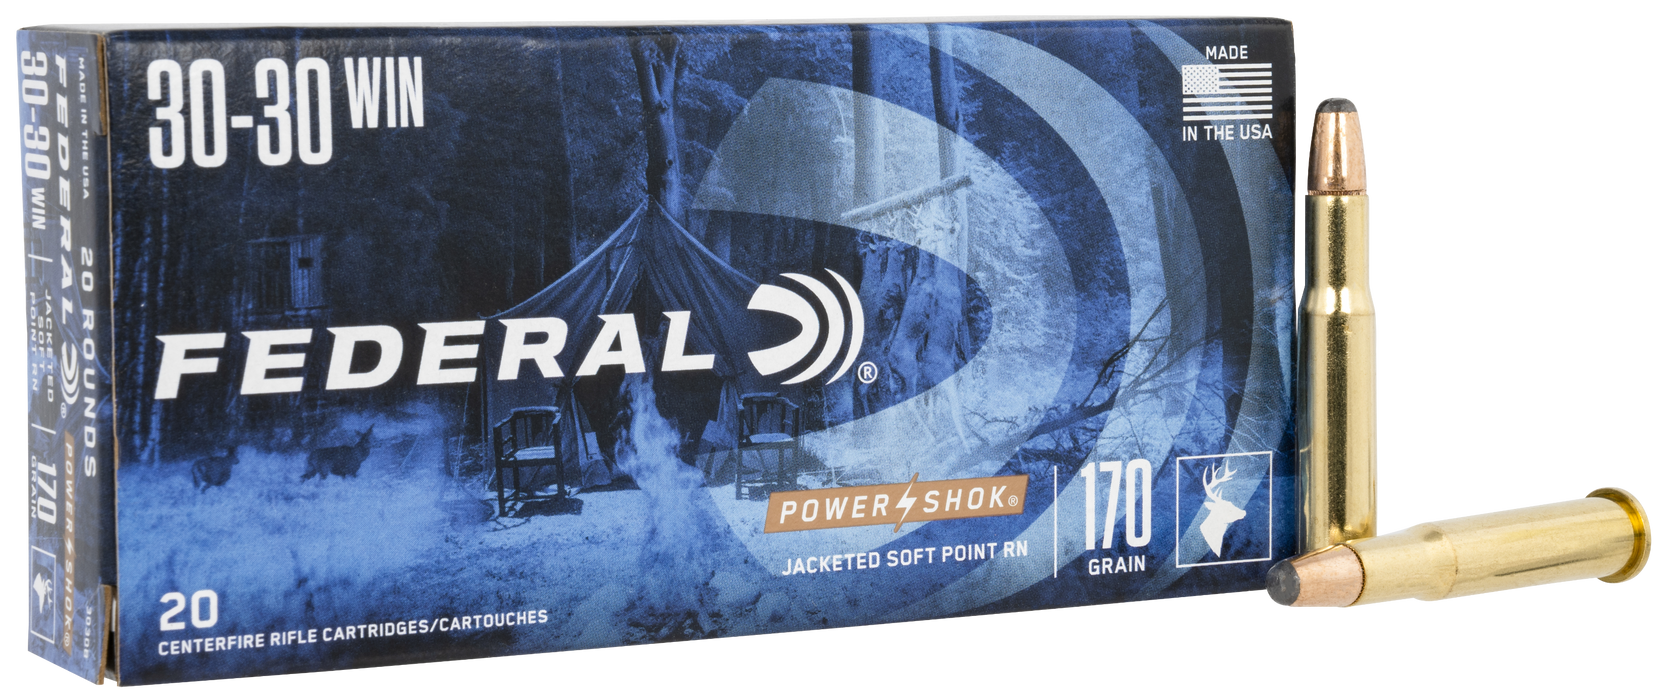 Federal Power-Shok Hunting .30-30 Win 170 Gr Jacketed Soft Point (JSP) 20 Per Box